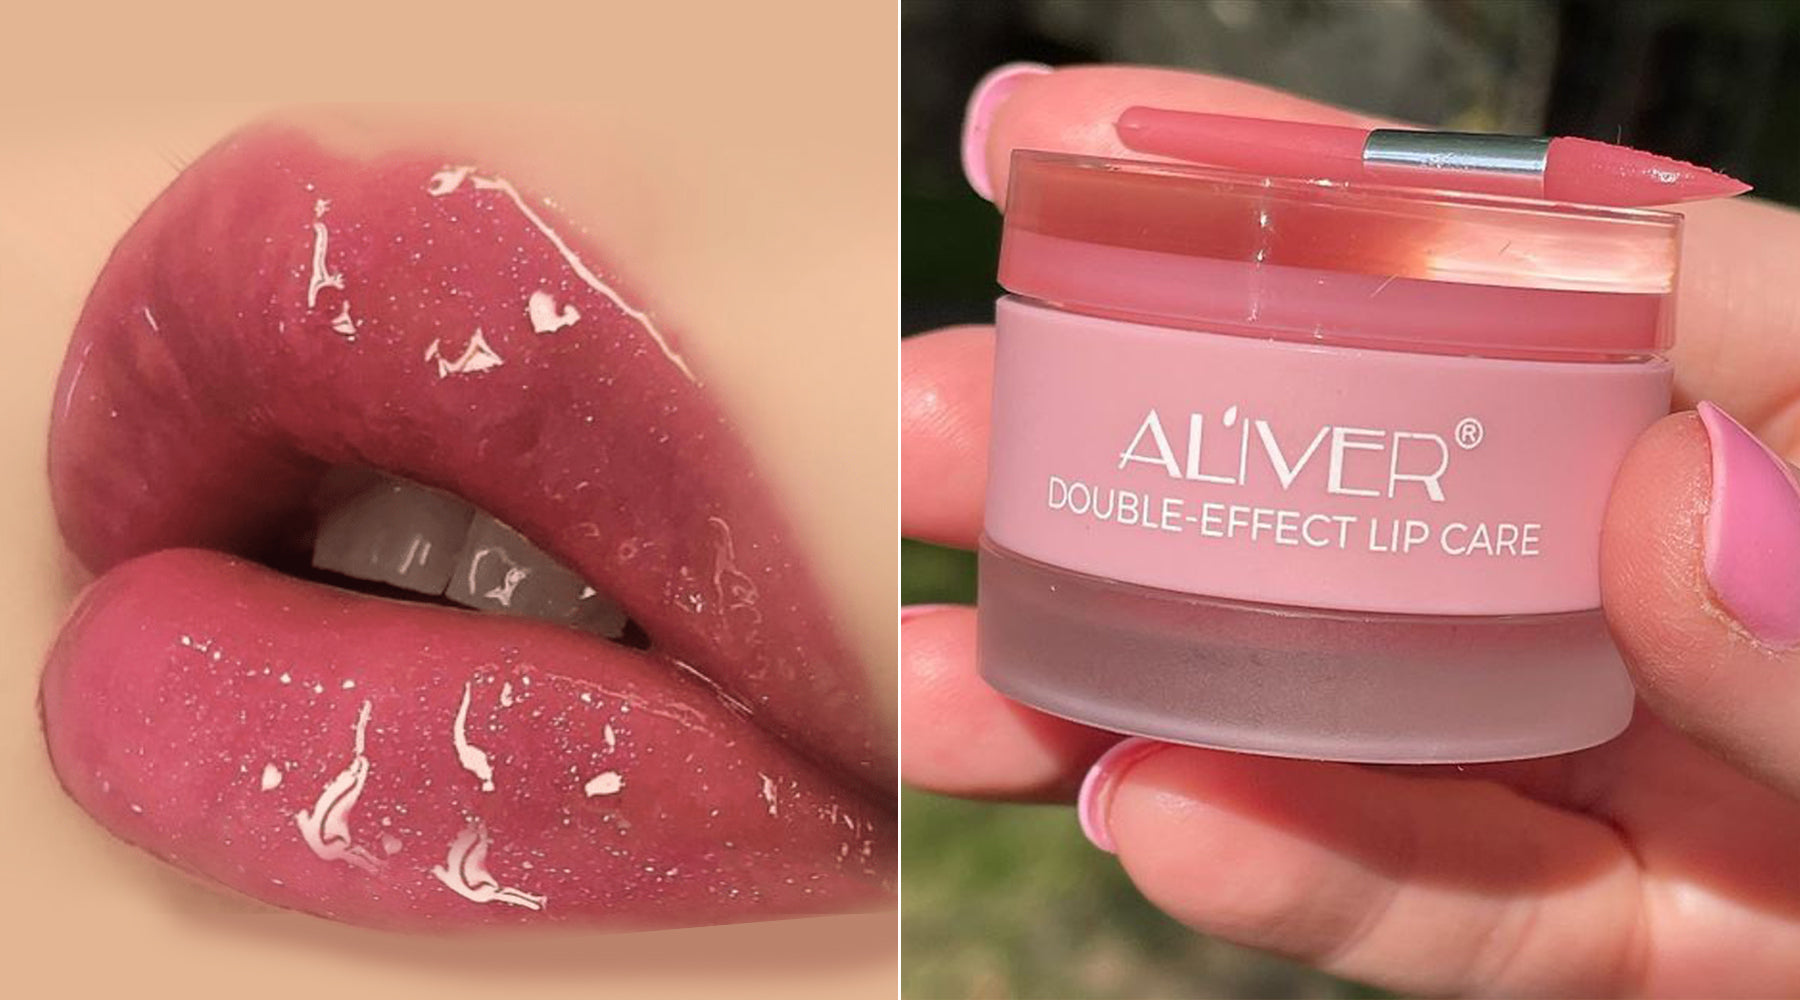 10 Tips To Care For Your Lips This Season|ALIVER Dual-effect Lip Mask